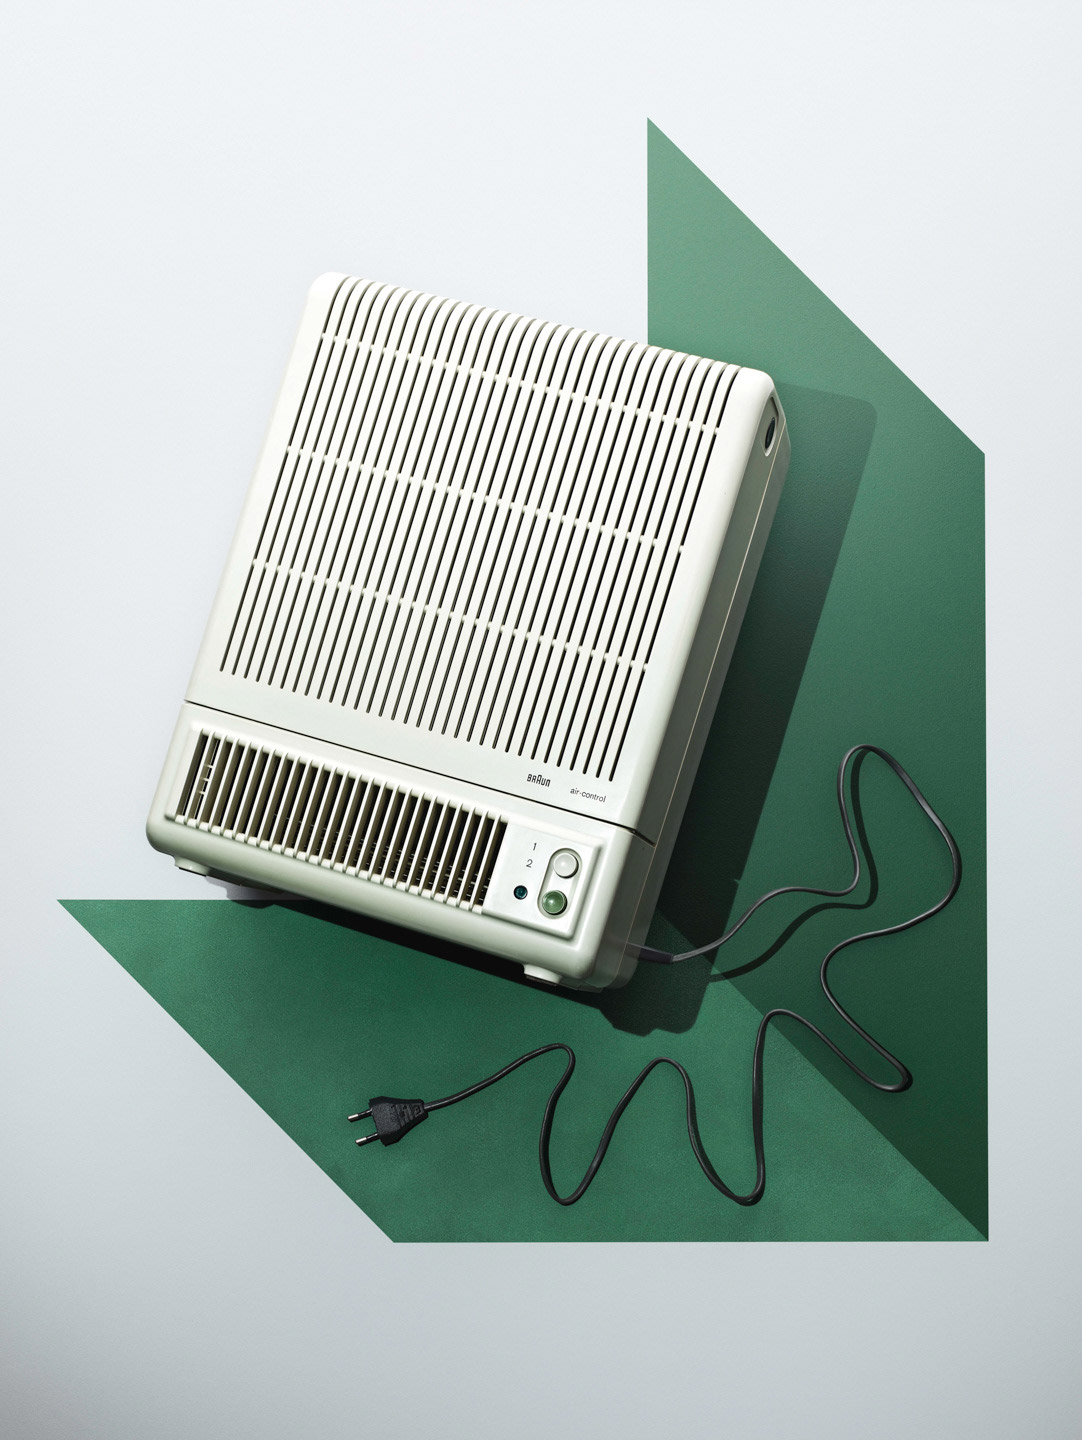 James Day: Still lives with electronic appliances designed by German Designer, Dieter Rams